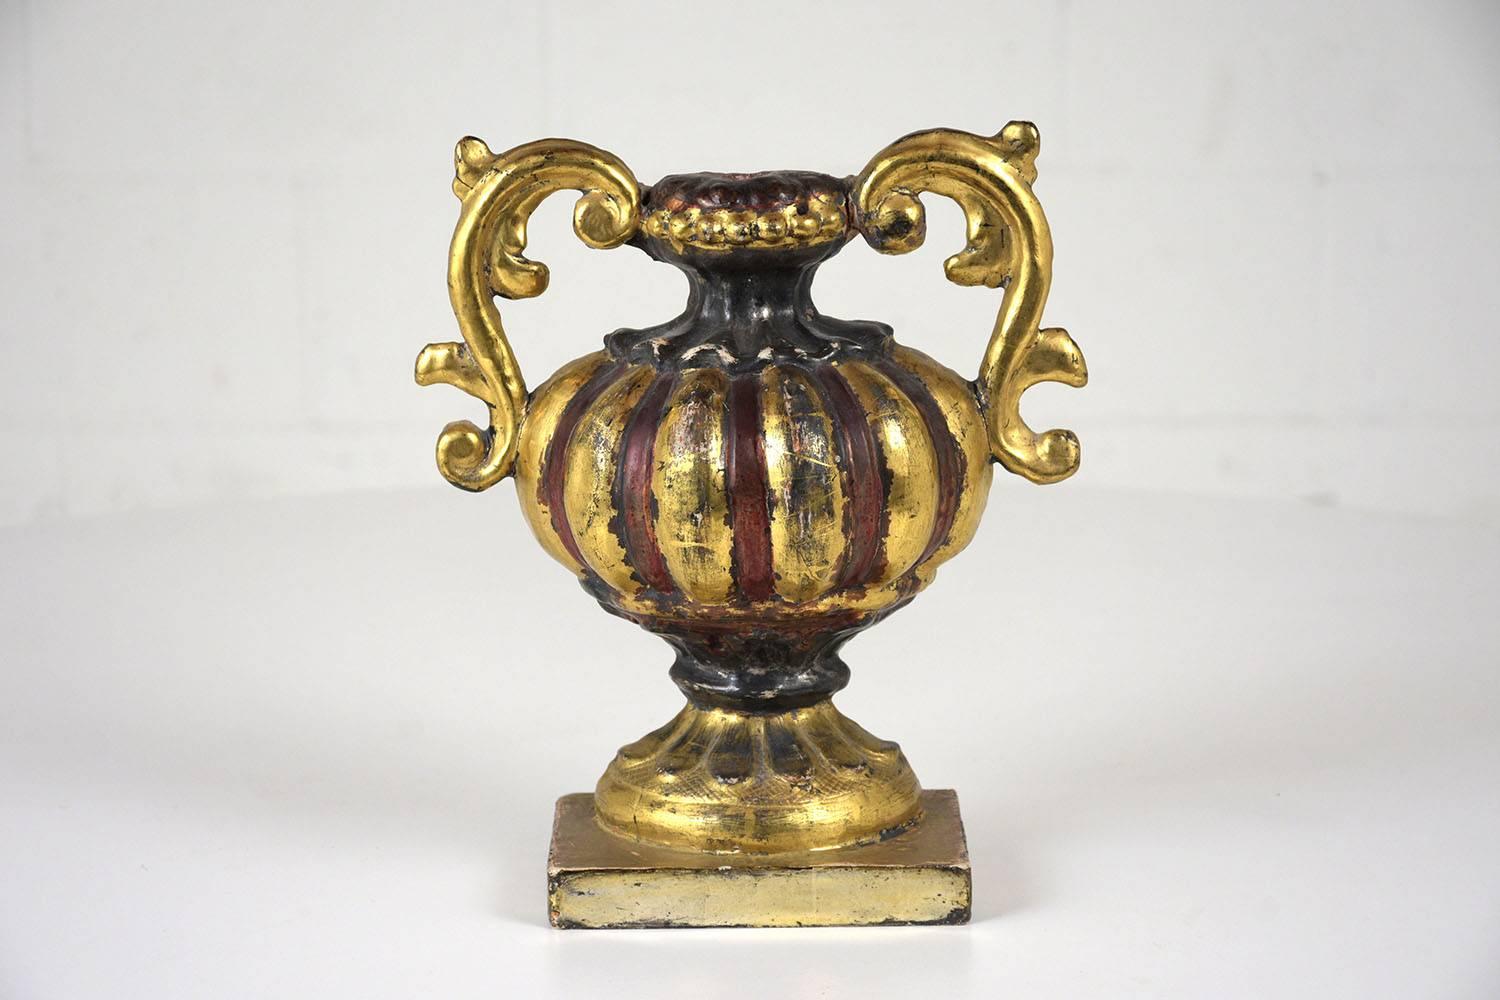 This pair of 1840s Italian Renaissance-style urns are carved from gilded wood with red and black accents. The urns feature classical motifs of acanthus leaves and scalloped edges. This pair of urns is sturdy, stunning, and ready to decorate any home